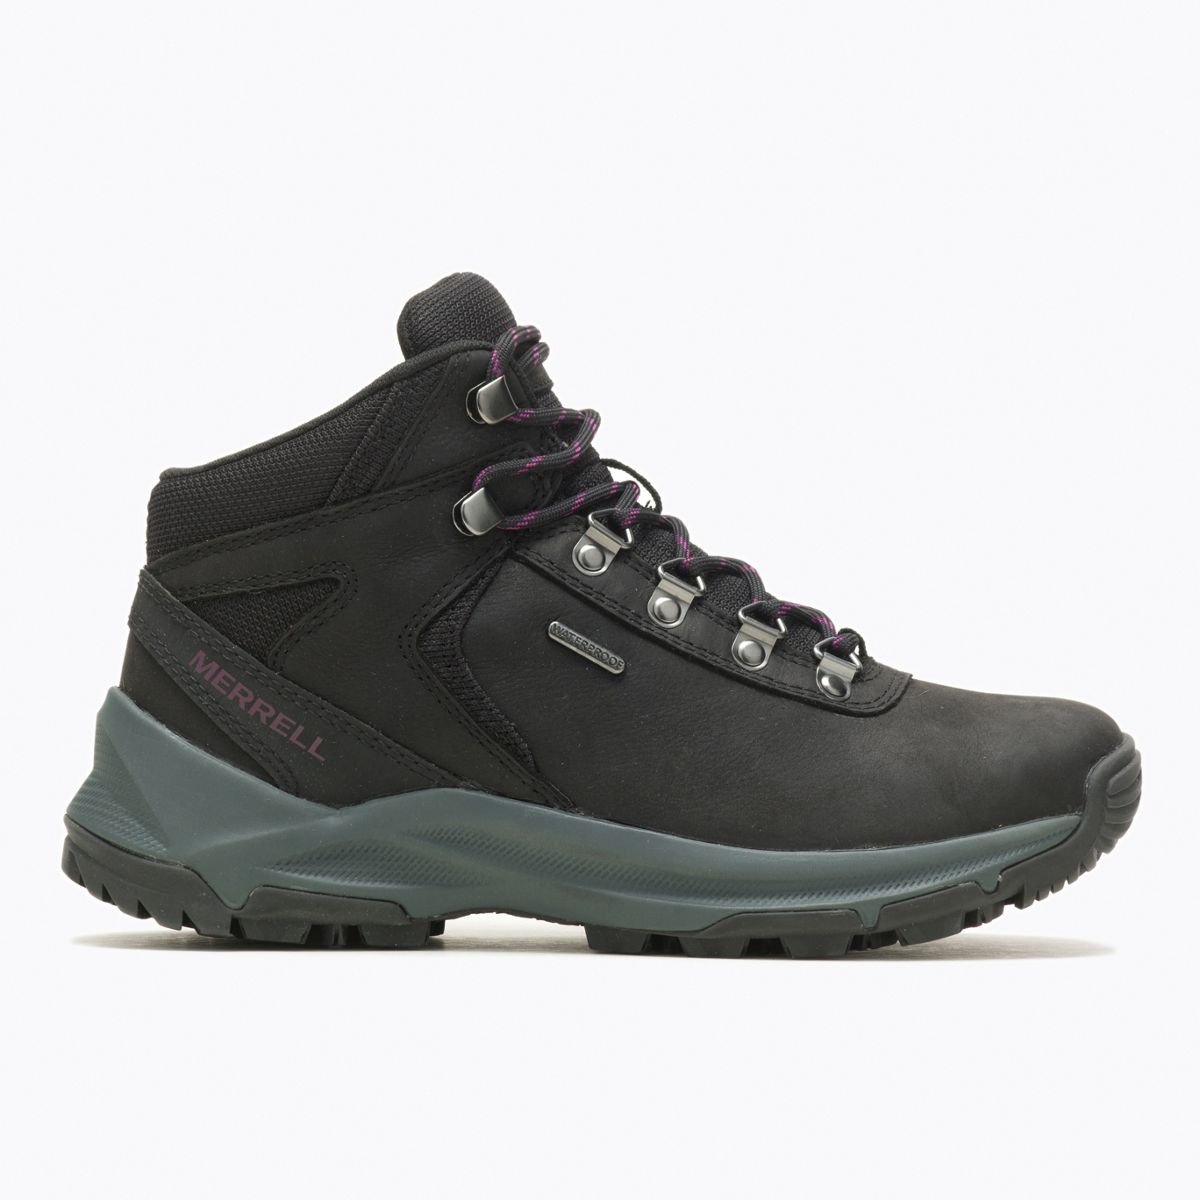 Erie Mid Leather Waterproof - Boots | Merrell